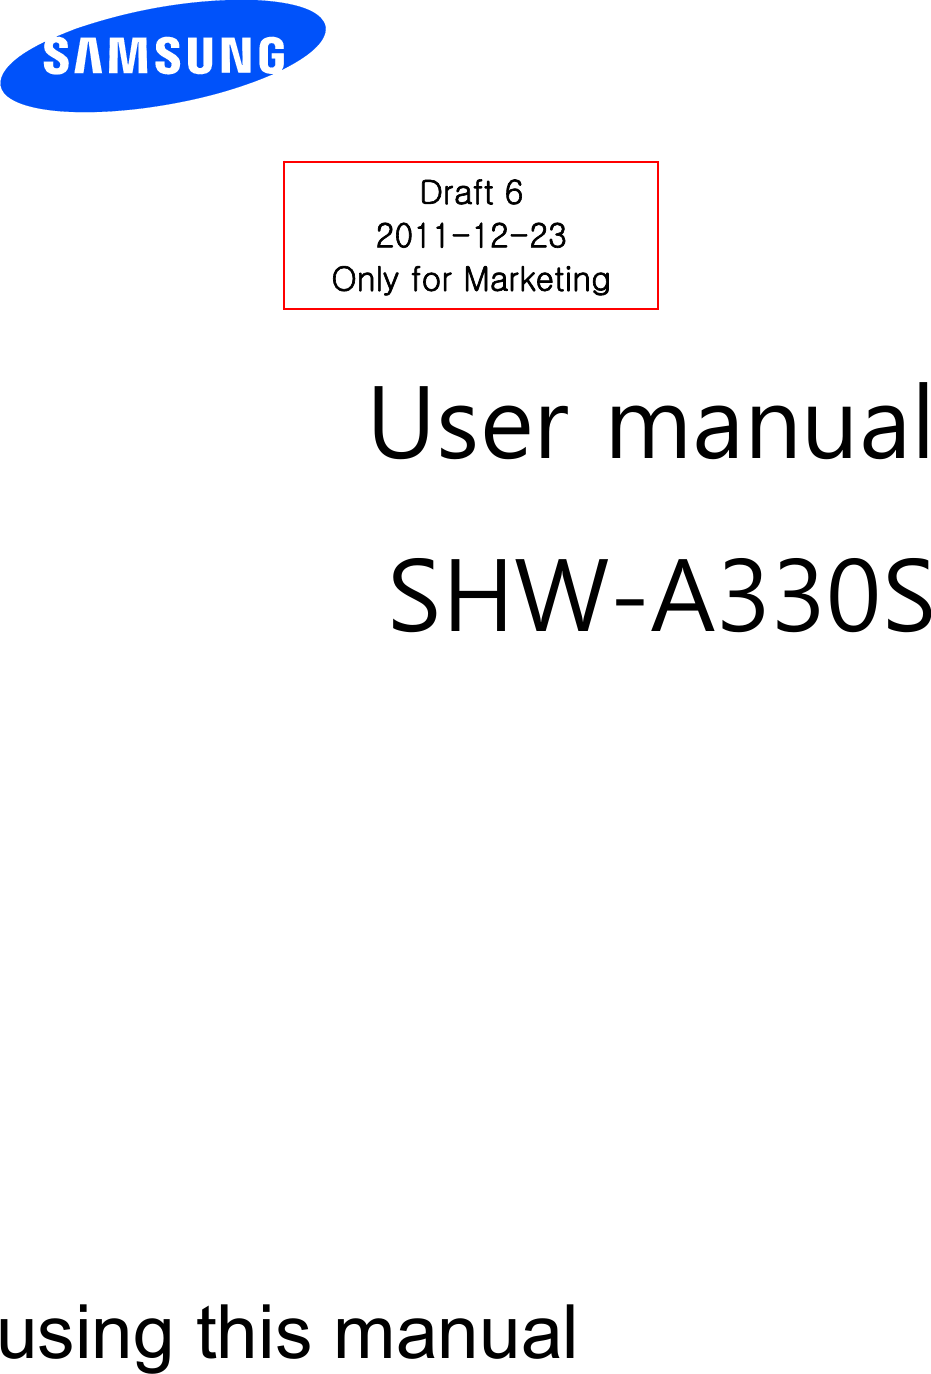         User manual SHW-A330S                  using this manual Draft 6 2011-12-23 Only for Marketing 